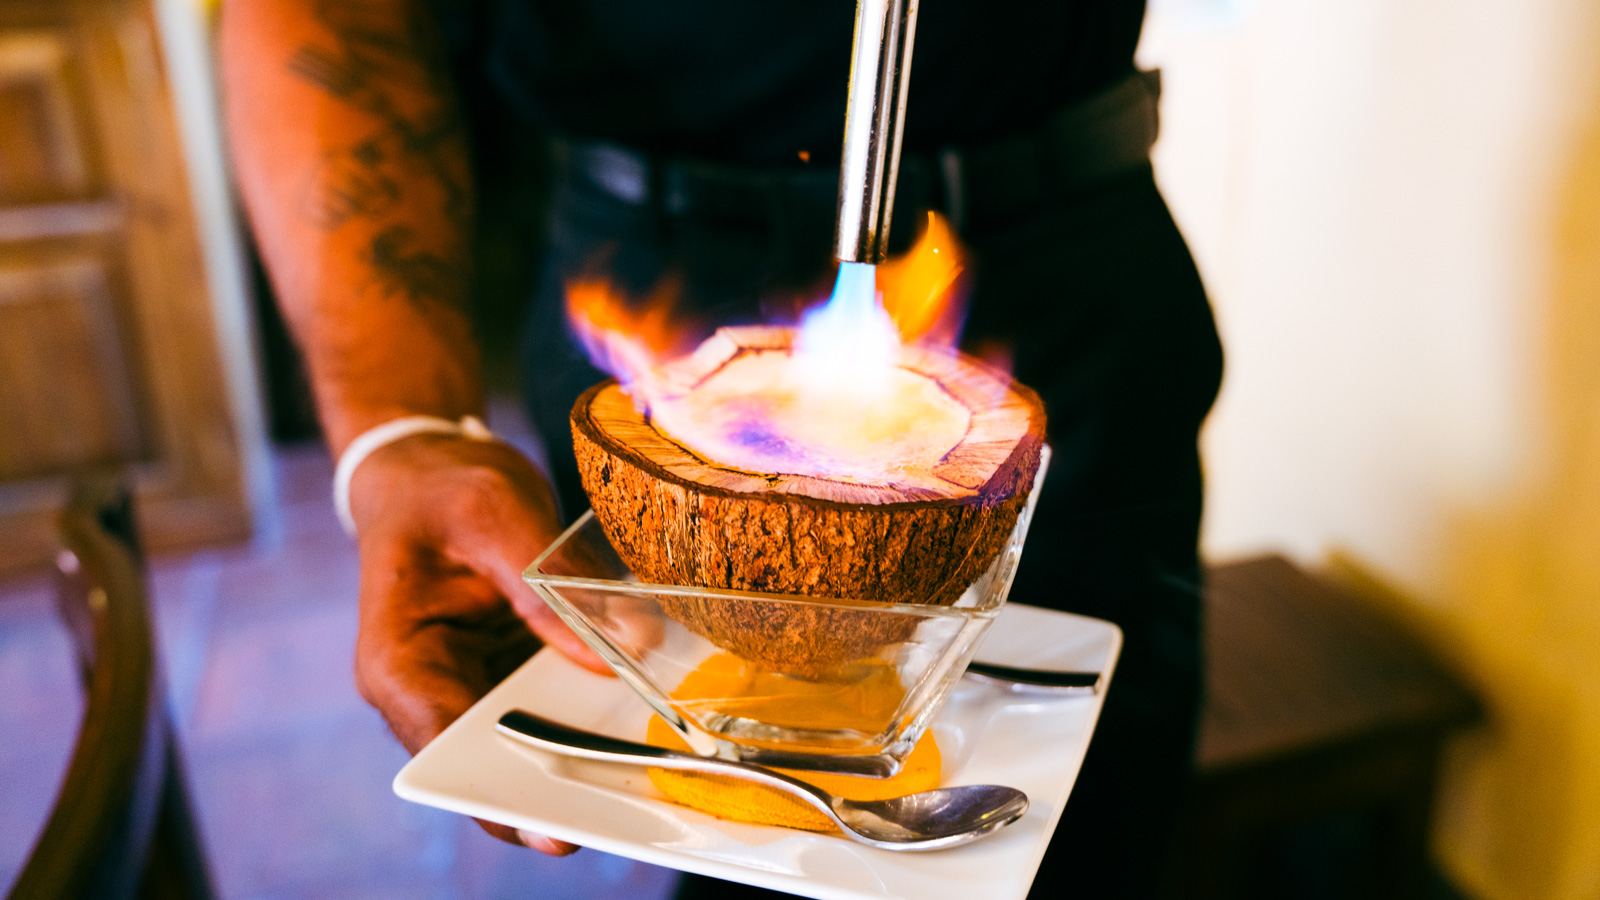 Coconut creme brulee at Ministry of Crab, Colombo